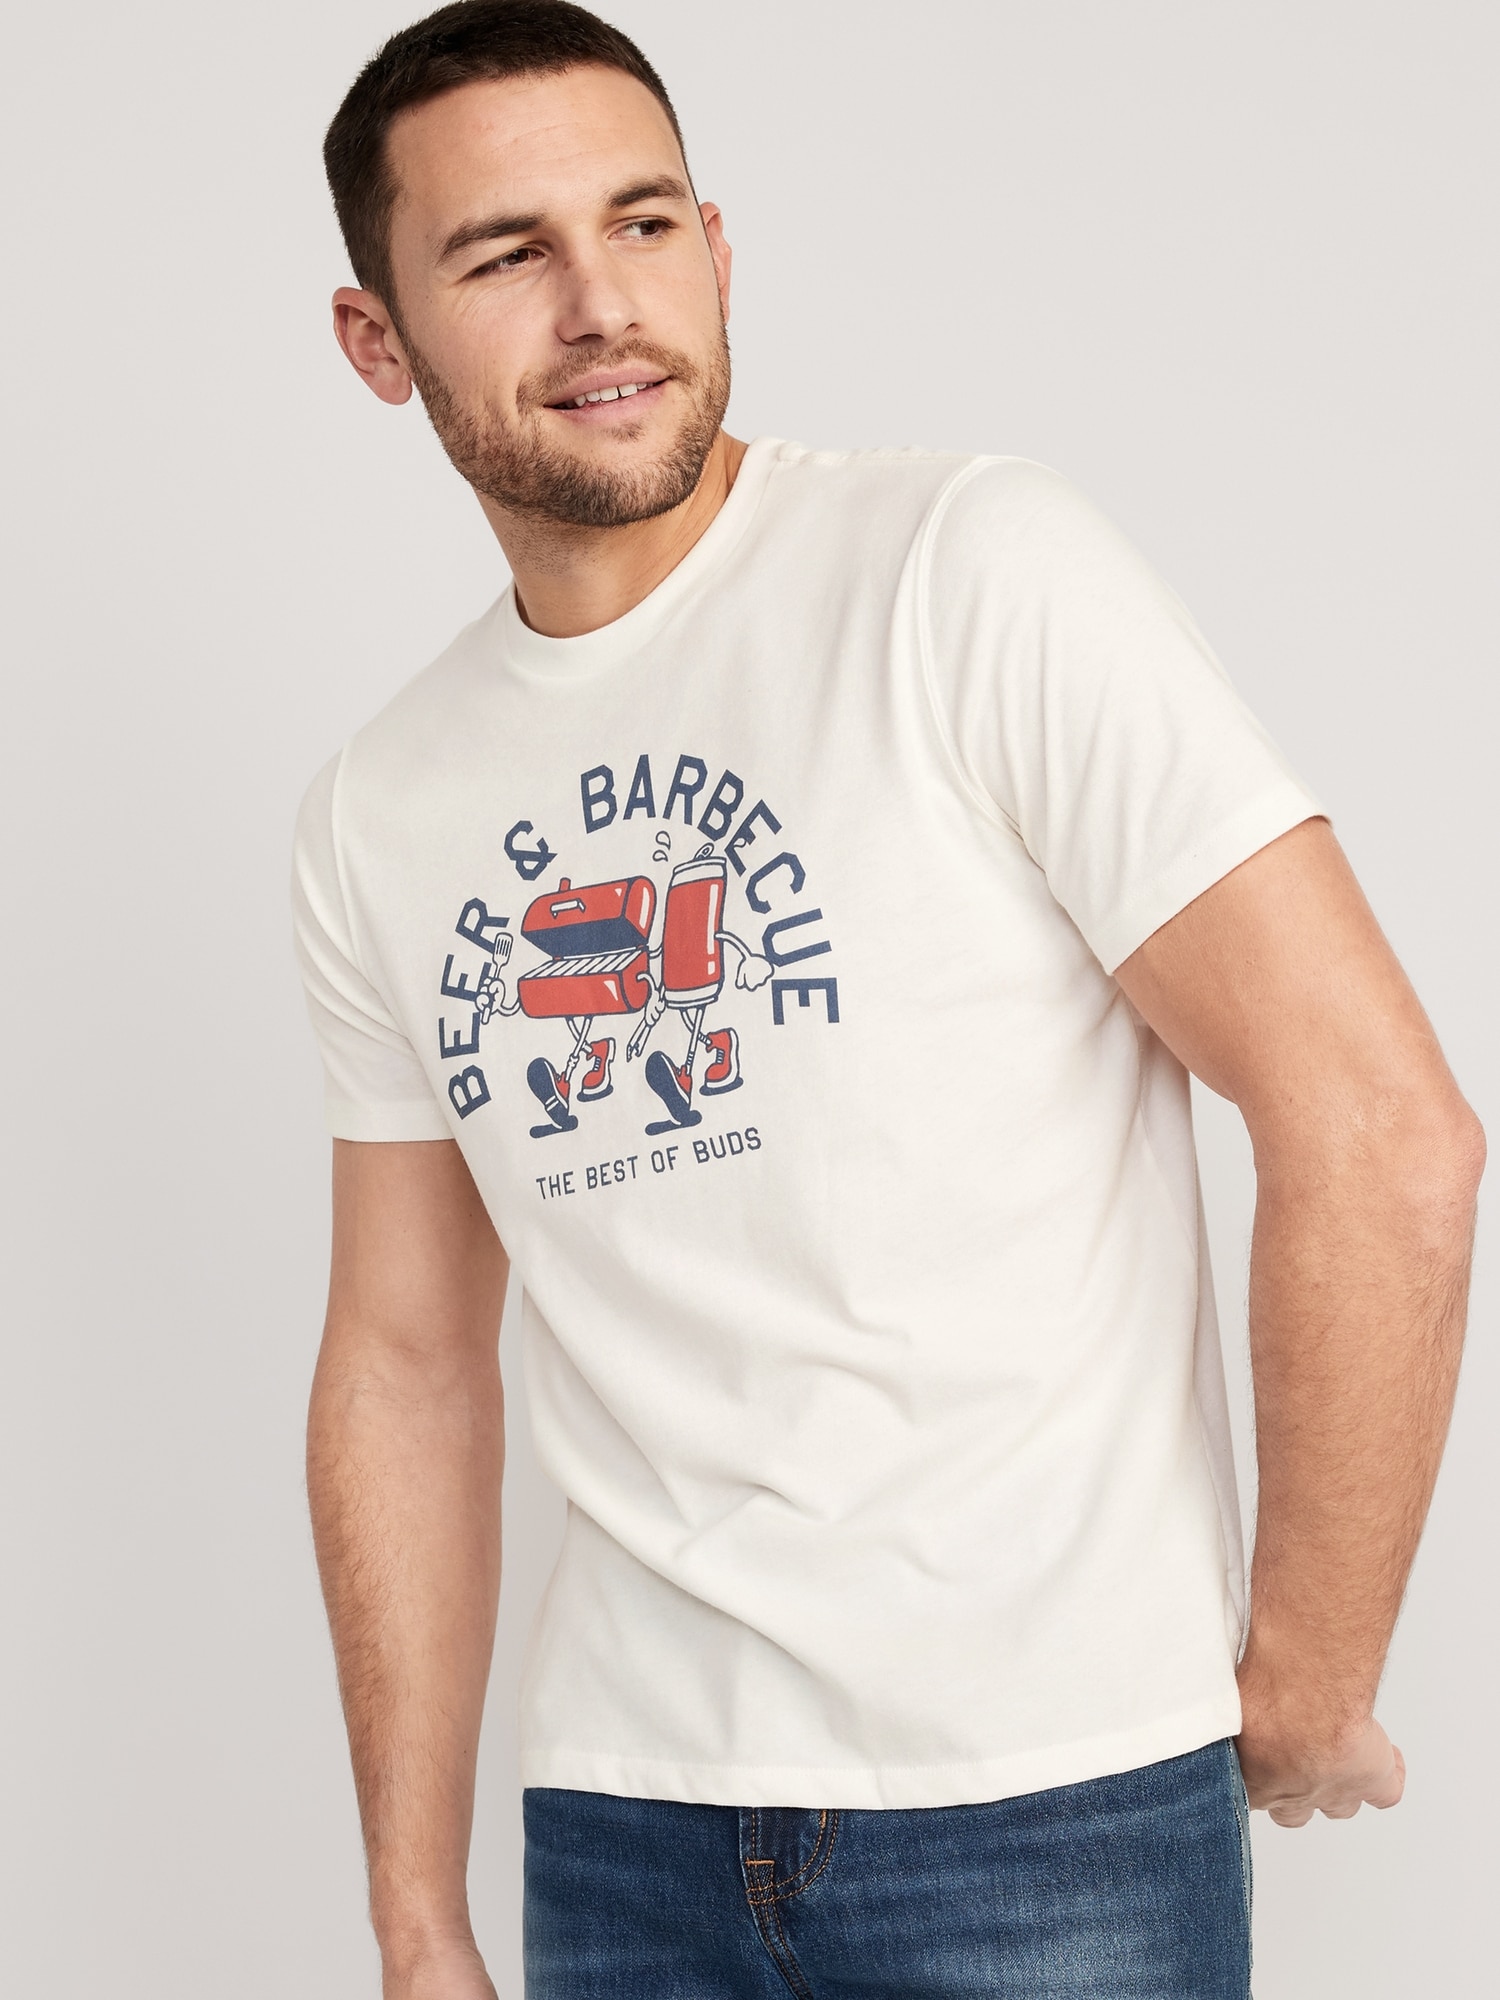 Garment-Dyed Graphic Tee for Men, Old Navy